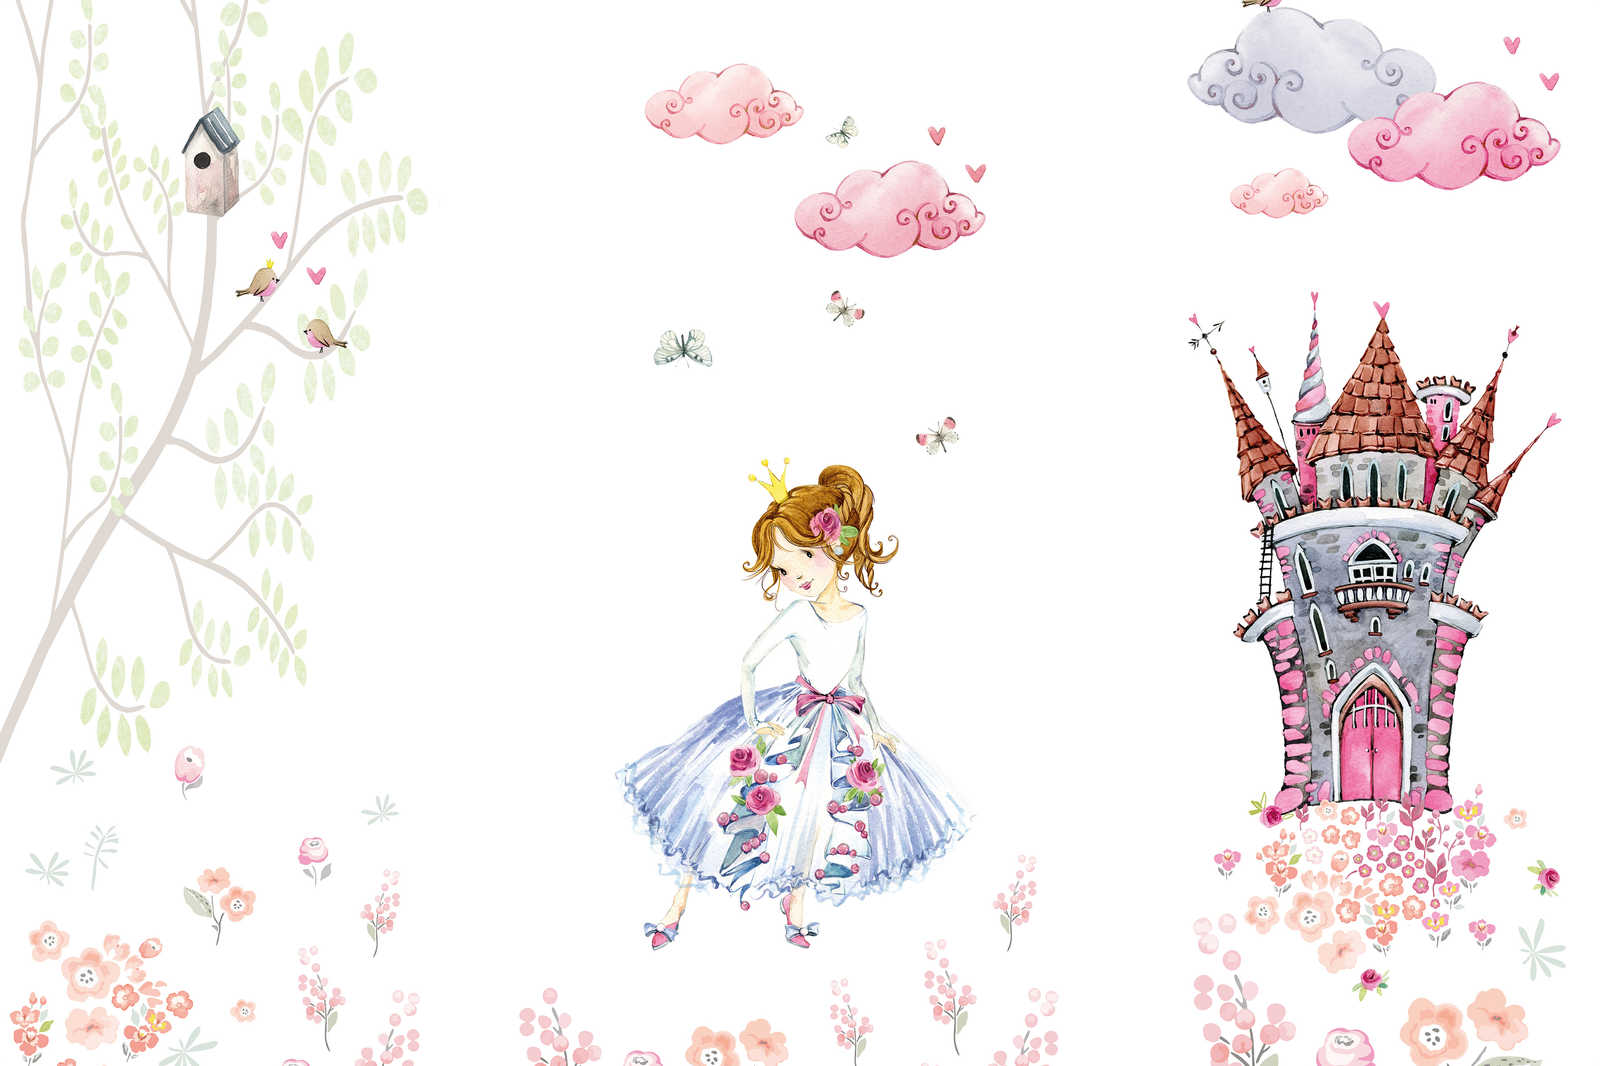             Canvas painting with princess in castle garden children's room - 0.90 m x 0.60 m
        